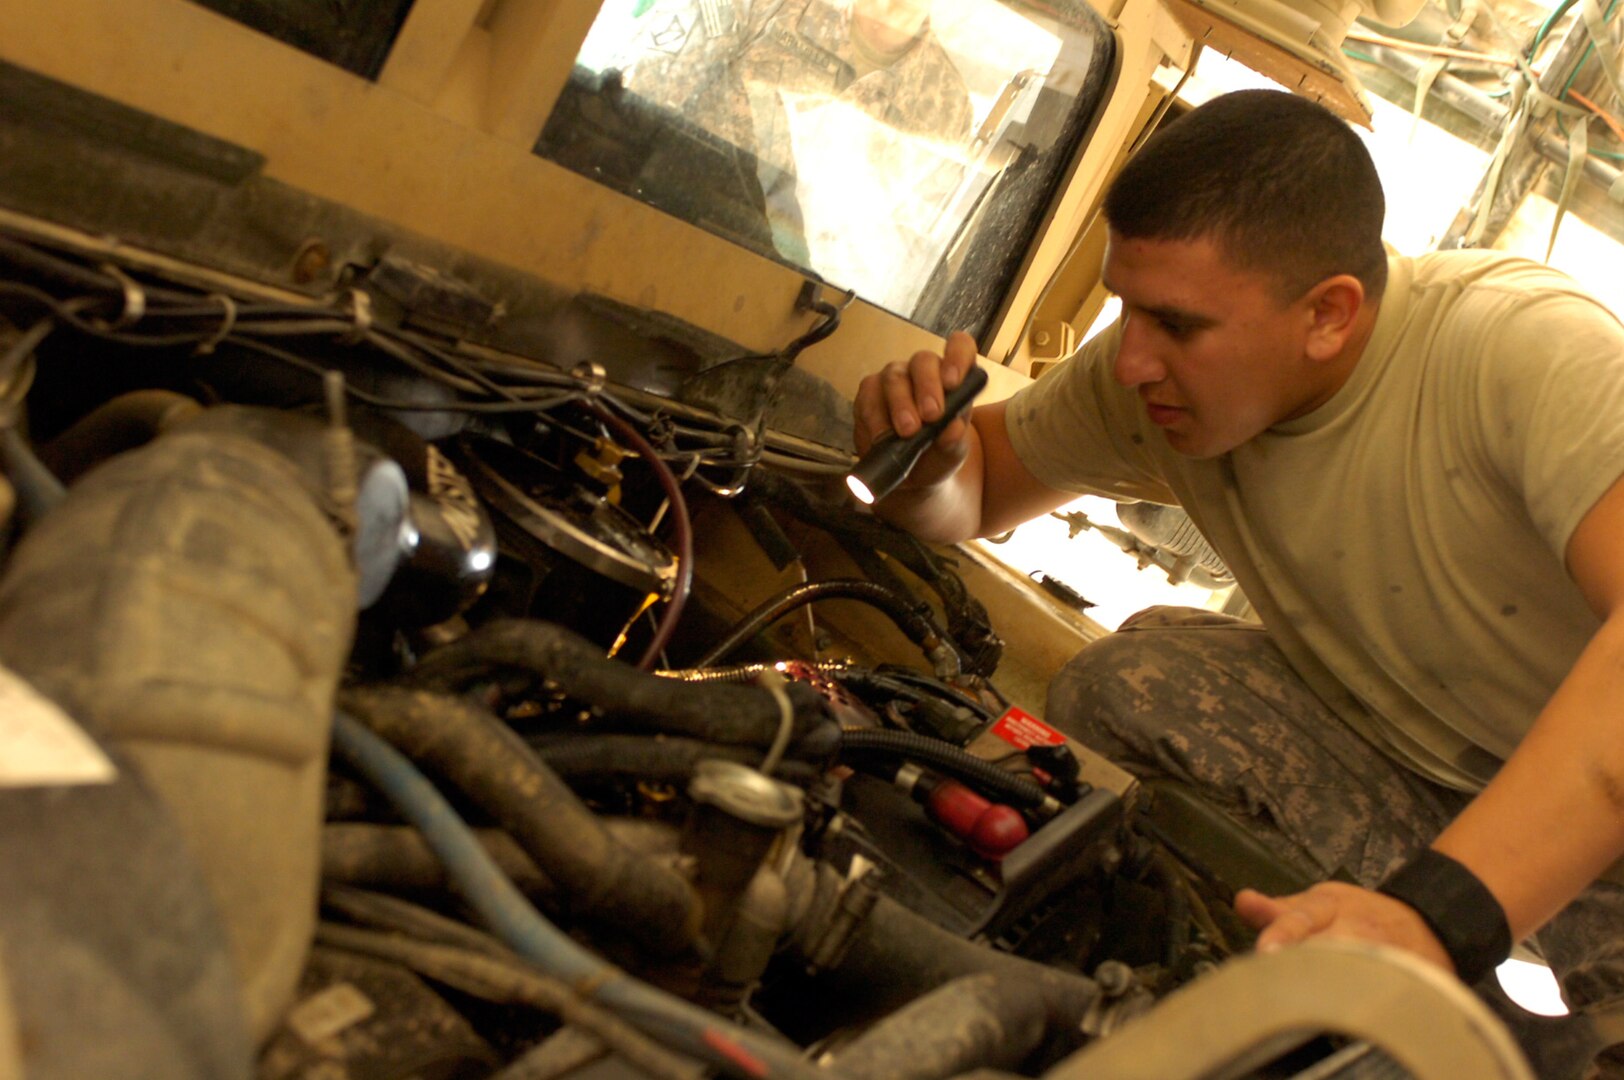 Spc. Jaun Barela of the 720th Convoy Support Company checks the fluids in his MRAP at a motor pool on Camp Adder, Iraq, Jan. 24, 2010.